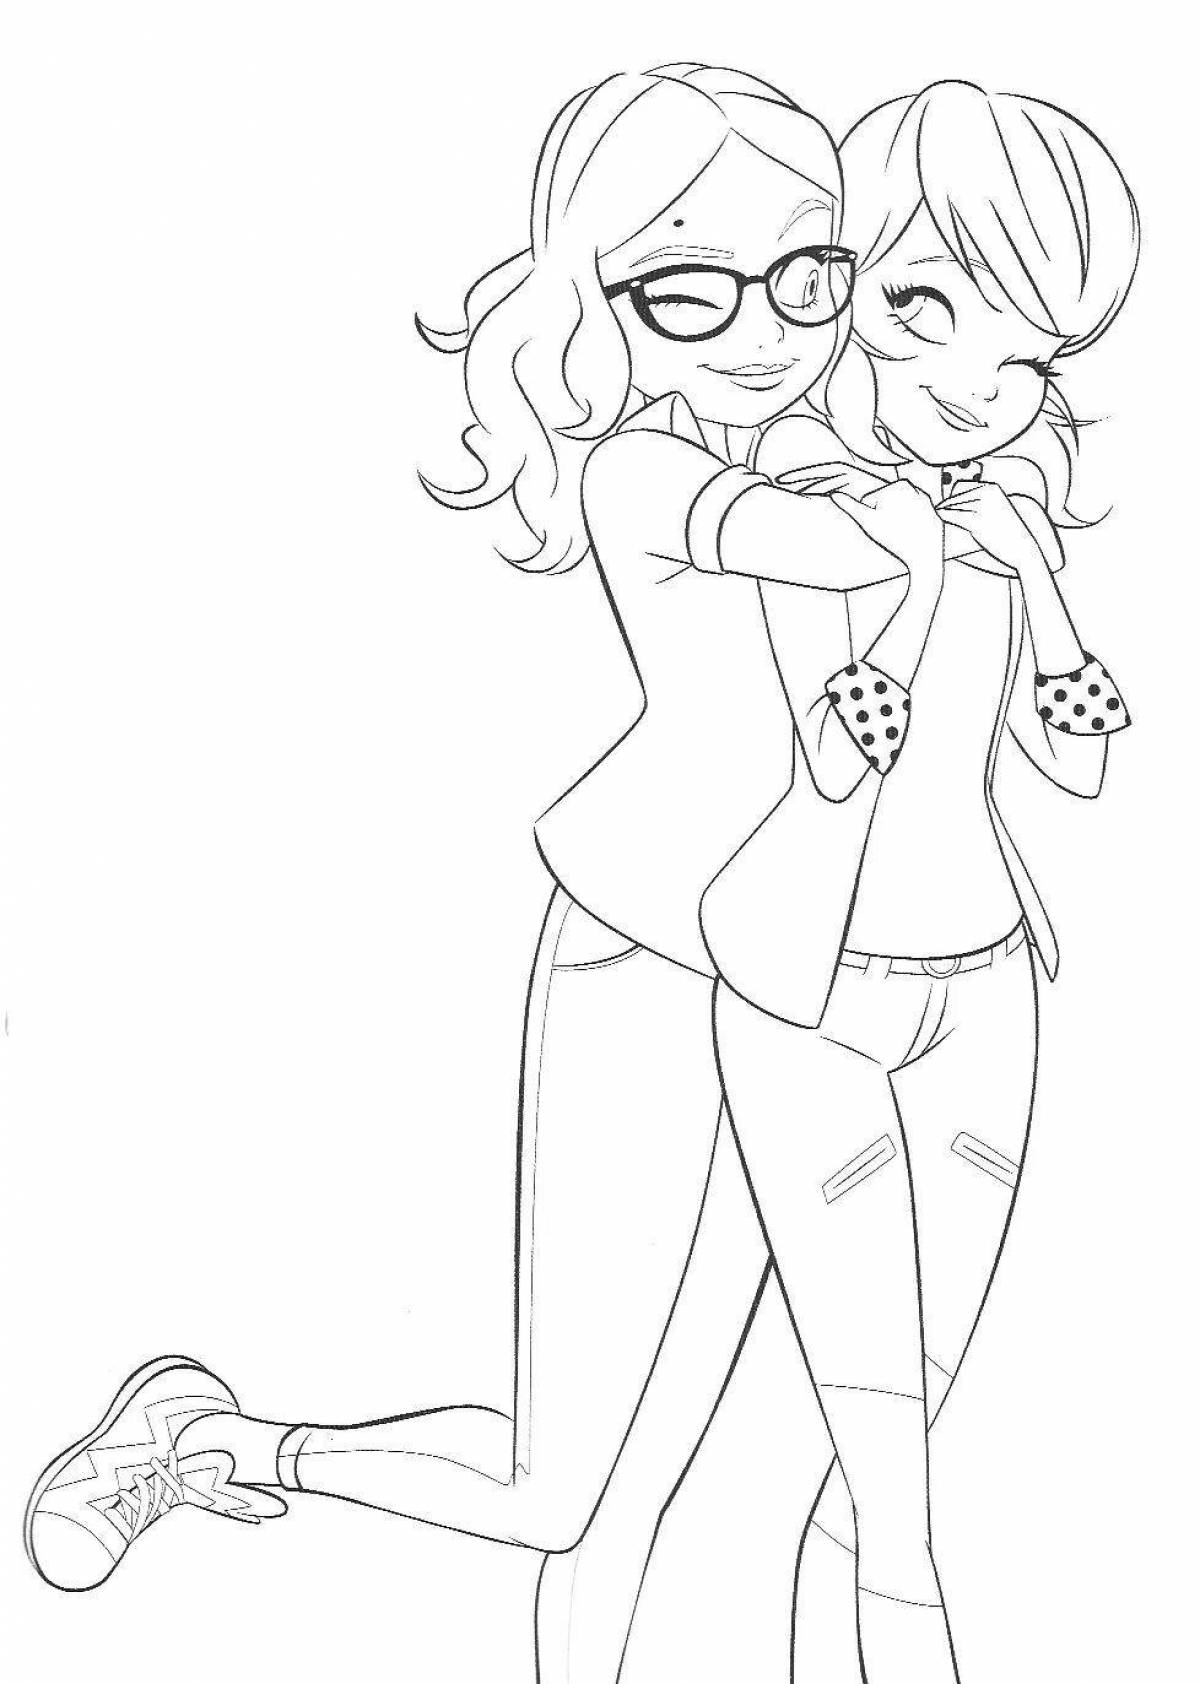 Coloring page glittering ladybug and marinette